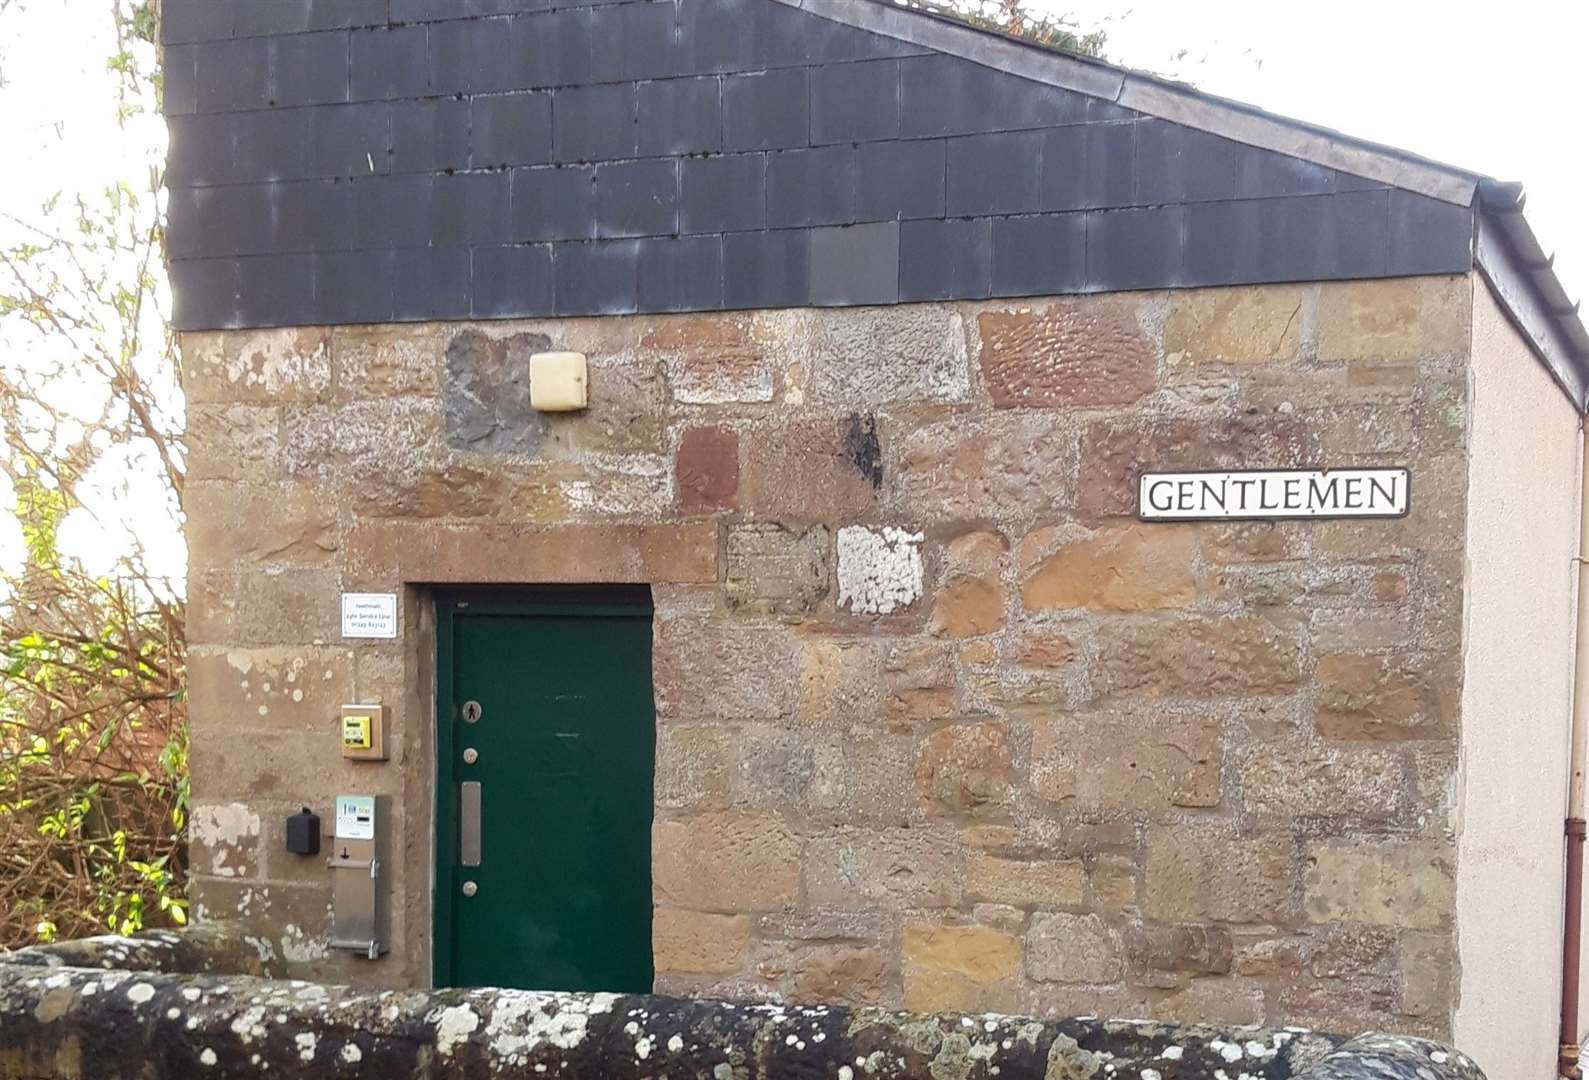 Dornoch Public Toilets have been the source of continuous complaints from visitors.